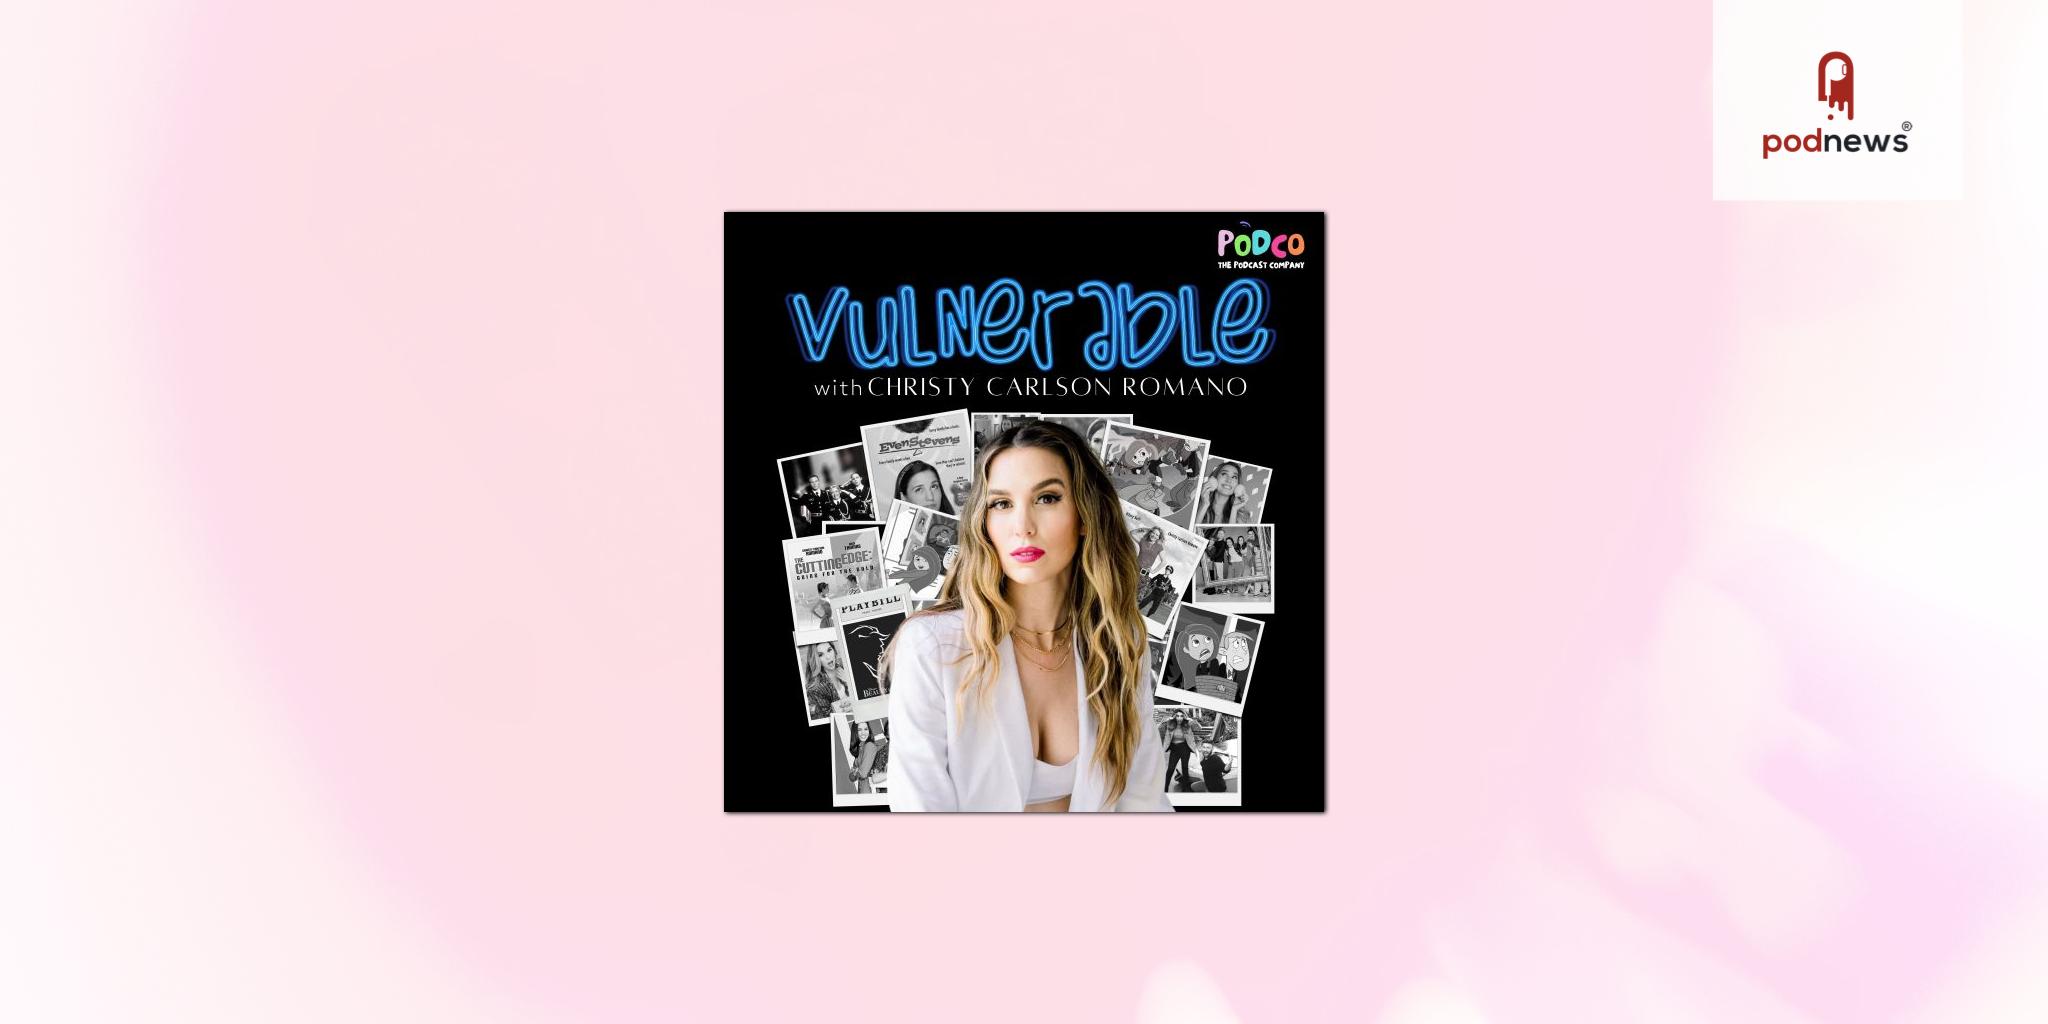 AdLarge Gets ‘Vulnerable’ with Christy Carlson Romano’s Extremely Honest Podcast